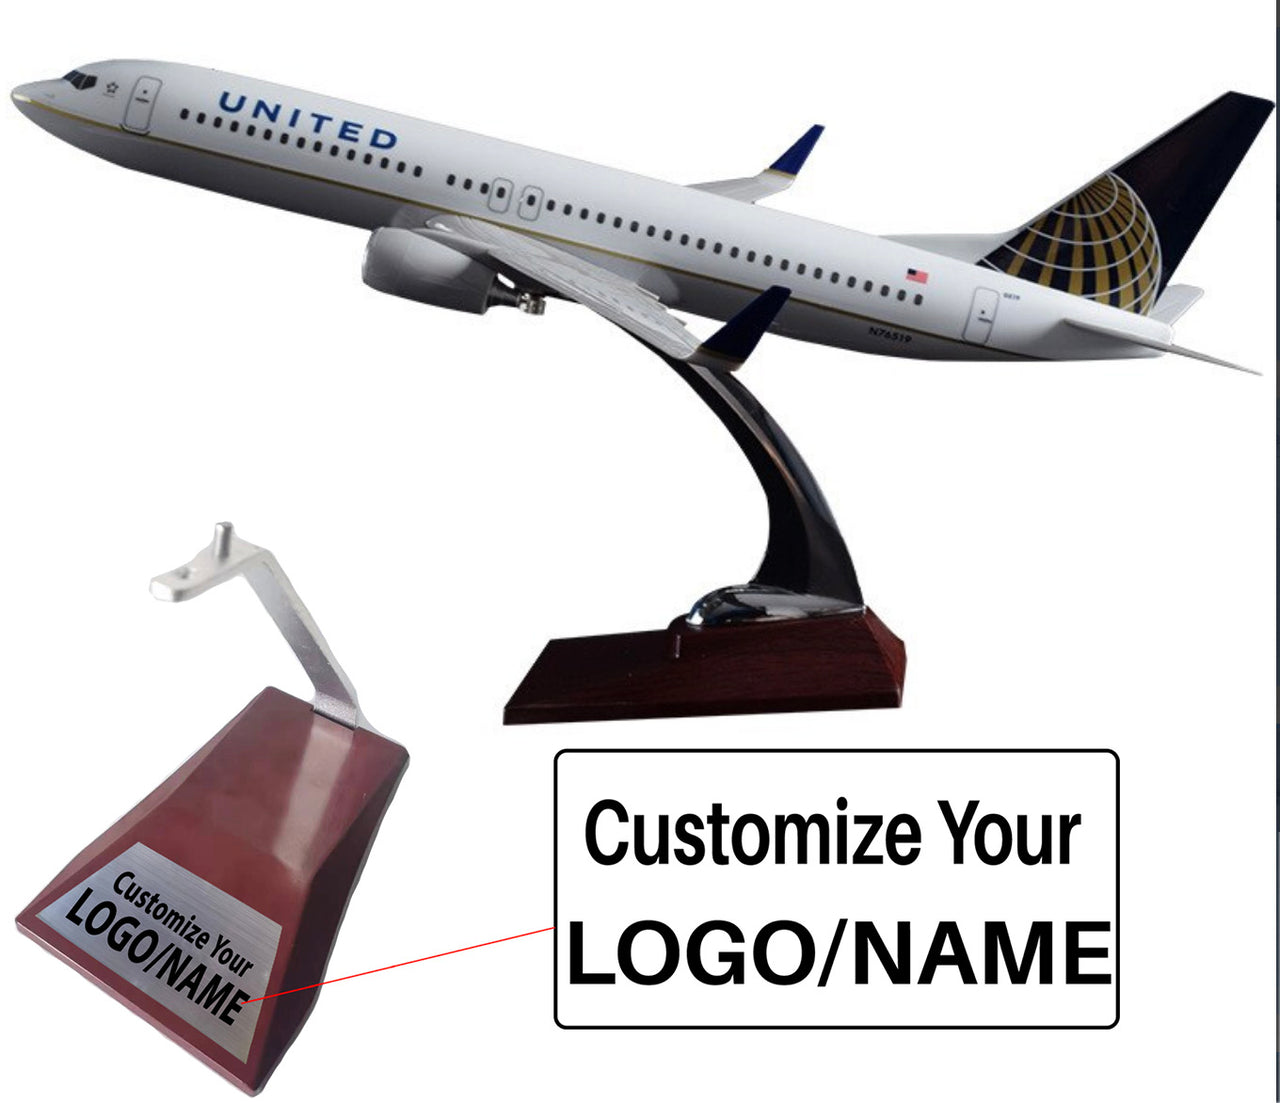 United Boeing 737-800 Airplane Model (Special Model 40CM)